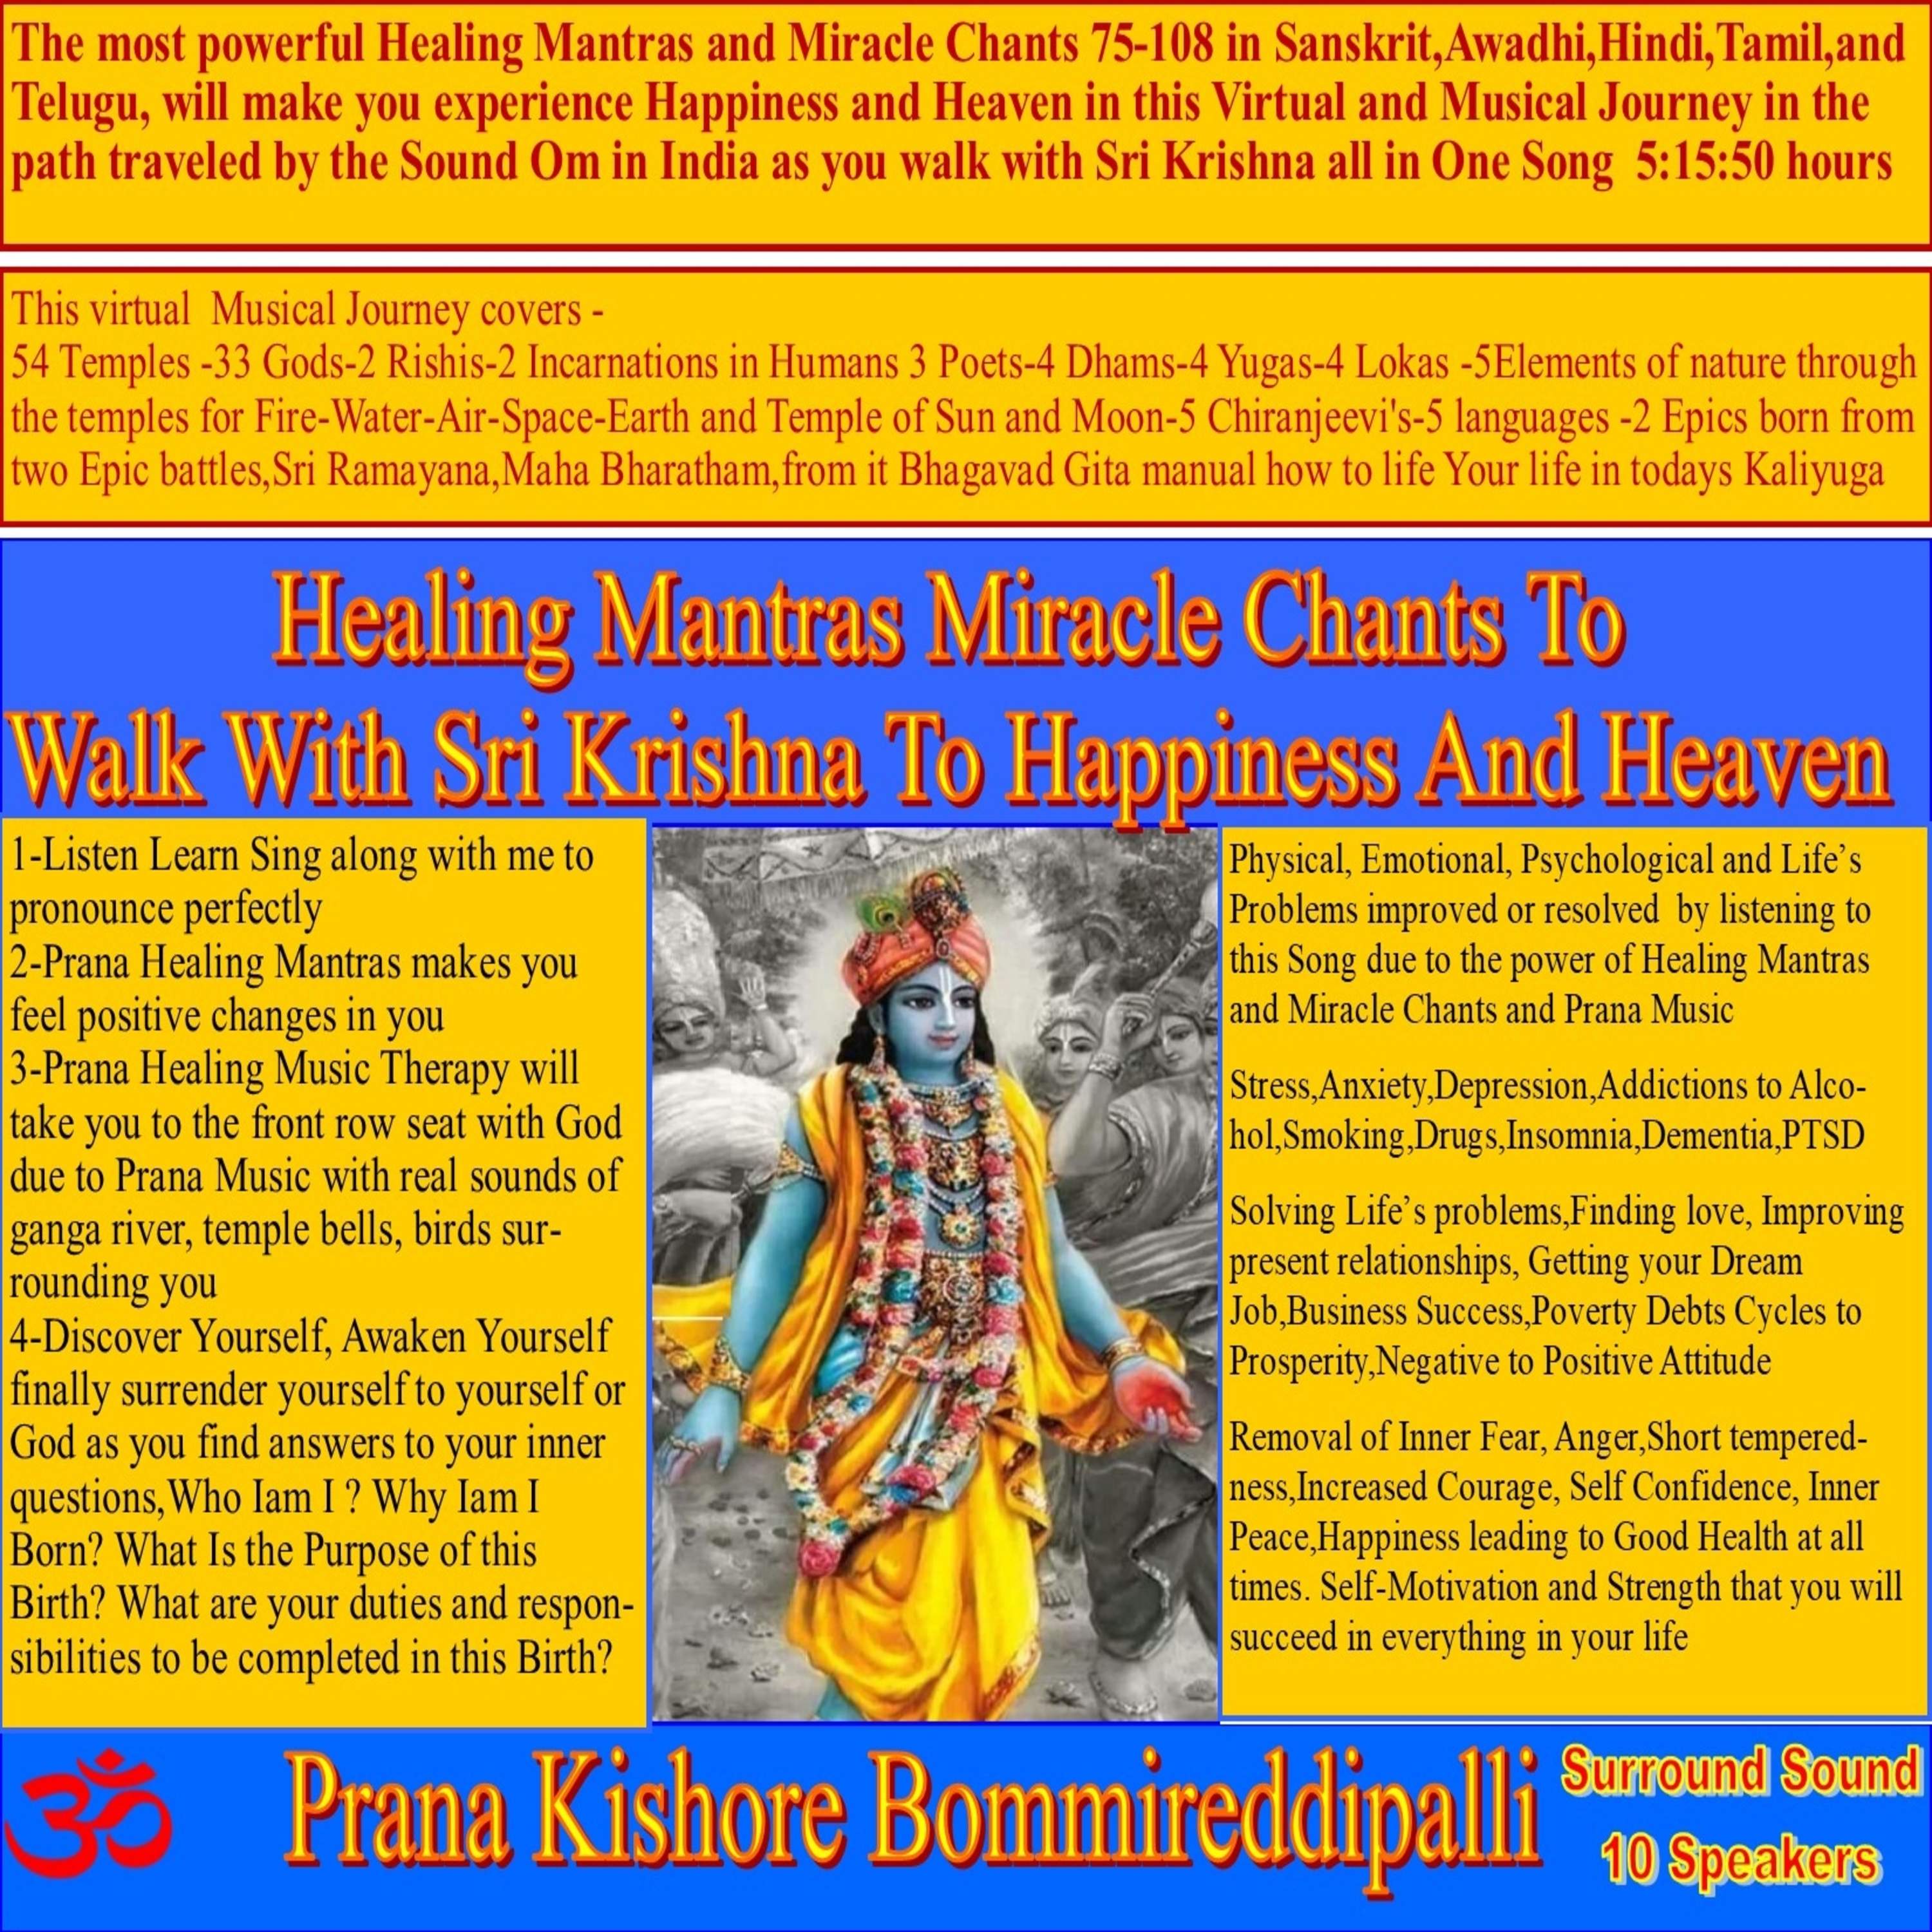 Healing Mantras features 3000 KB